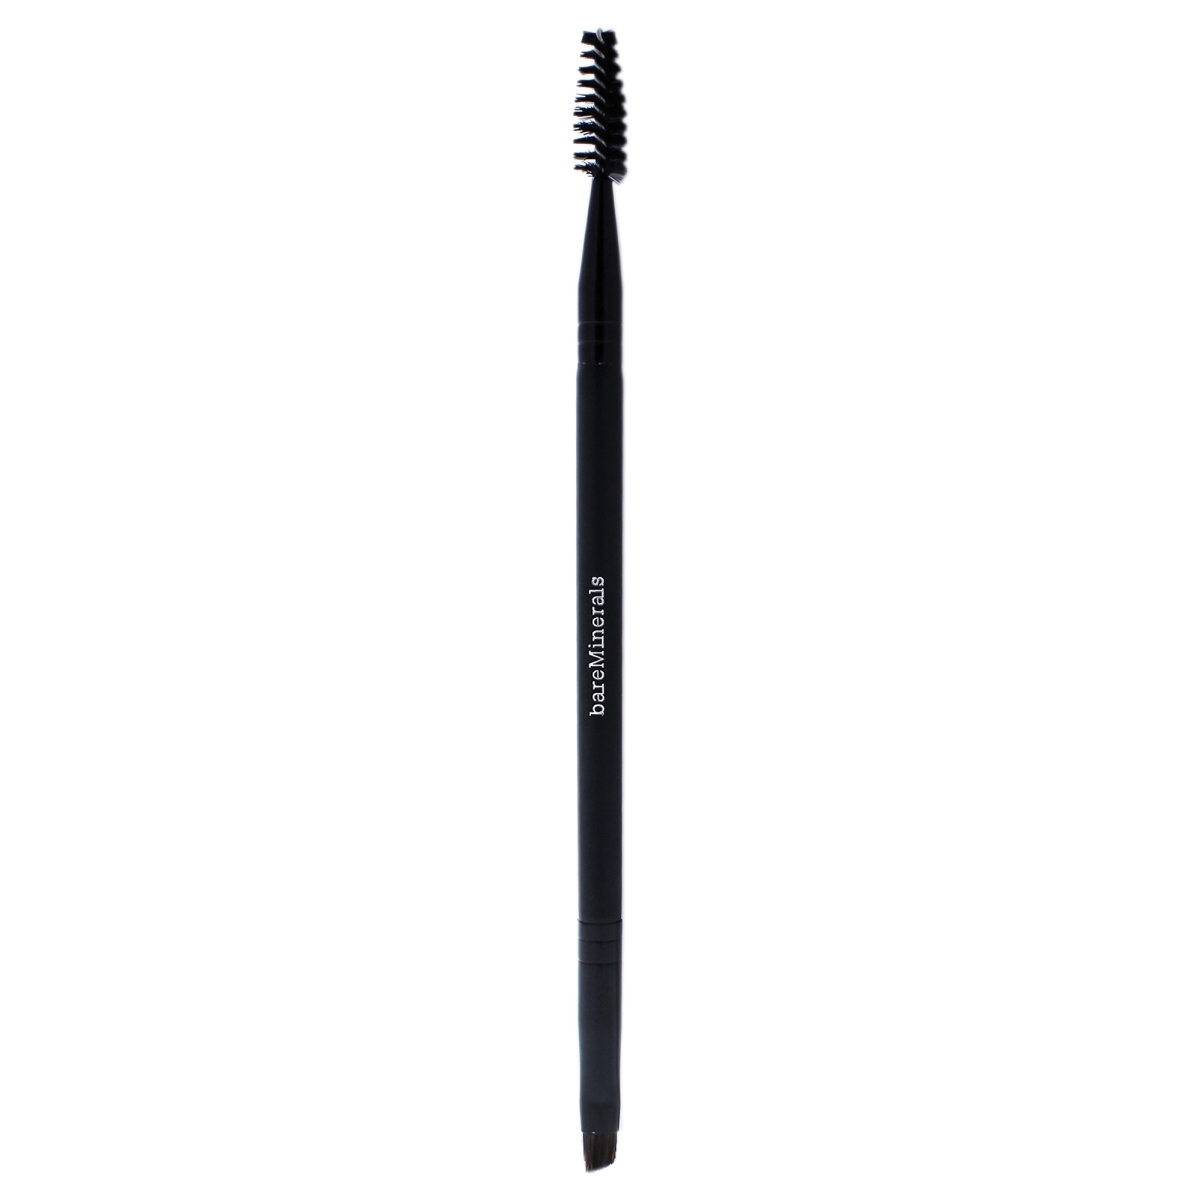 Picture of BareMinerals I0086253 Brow Master Brush for Women